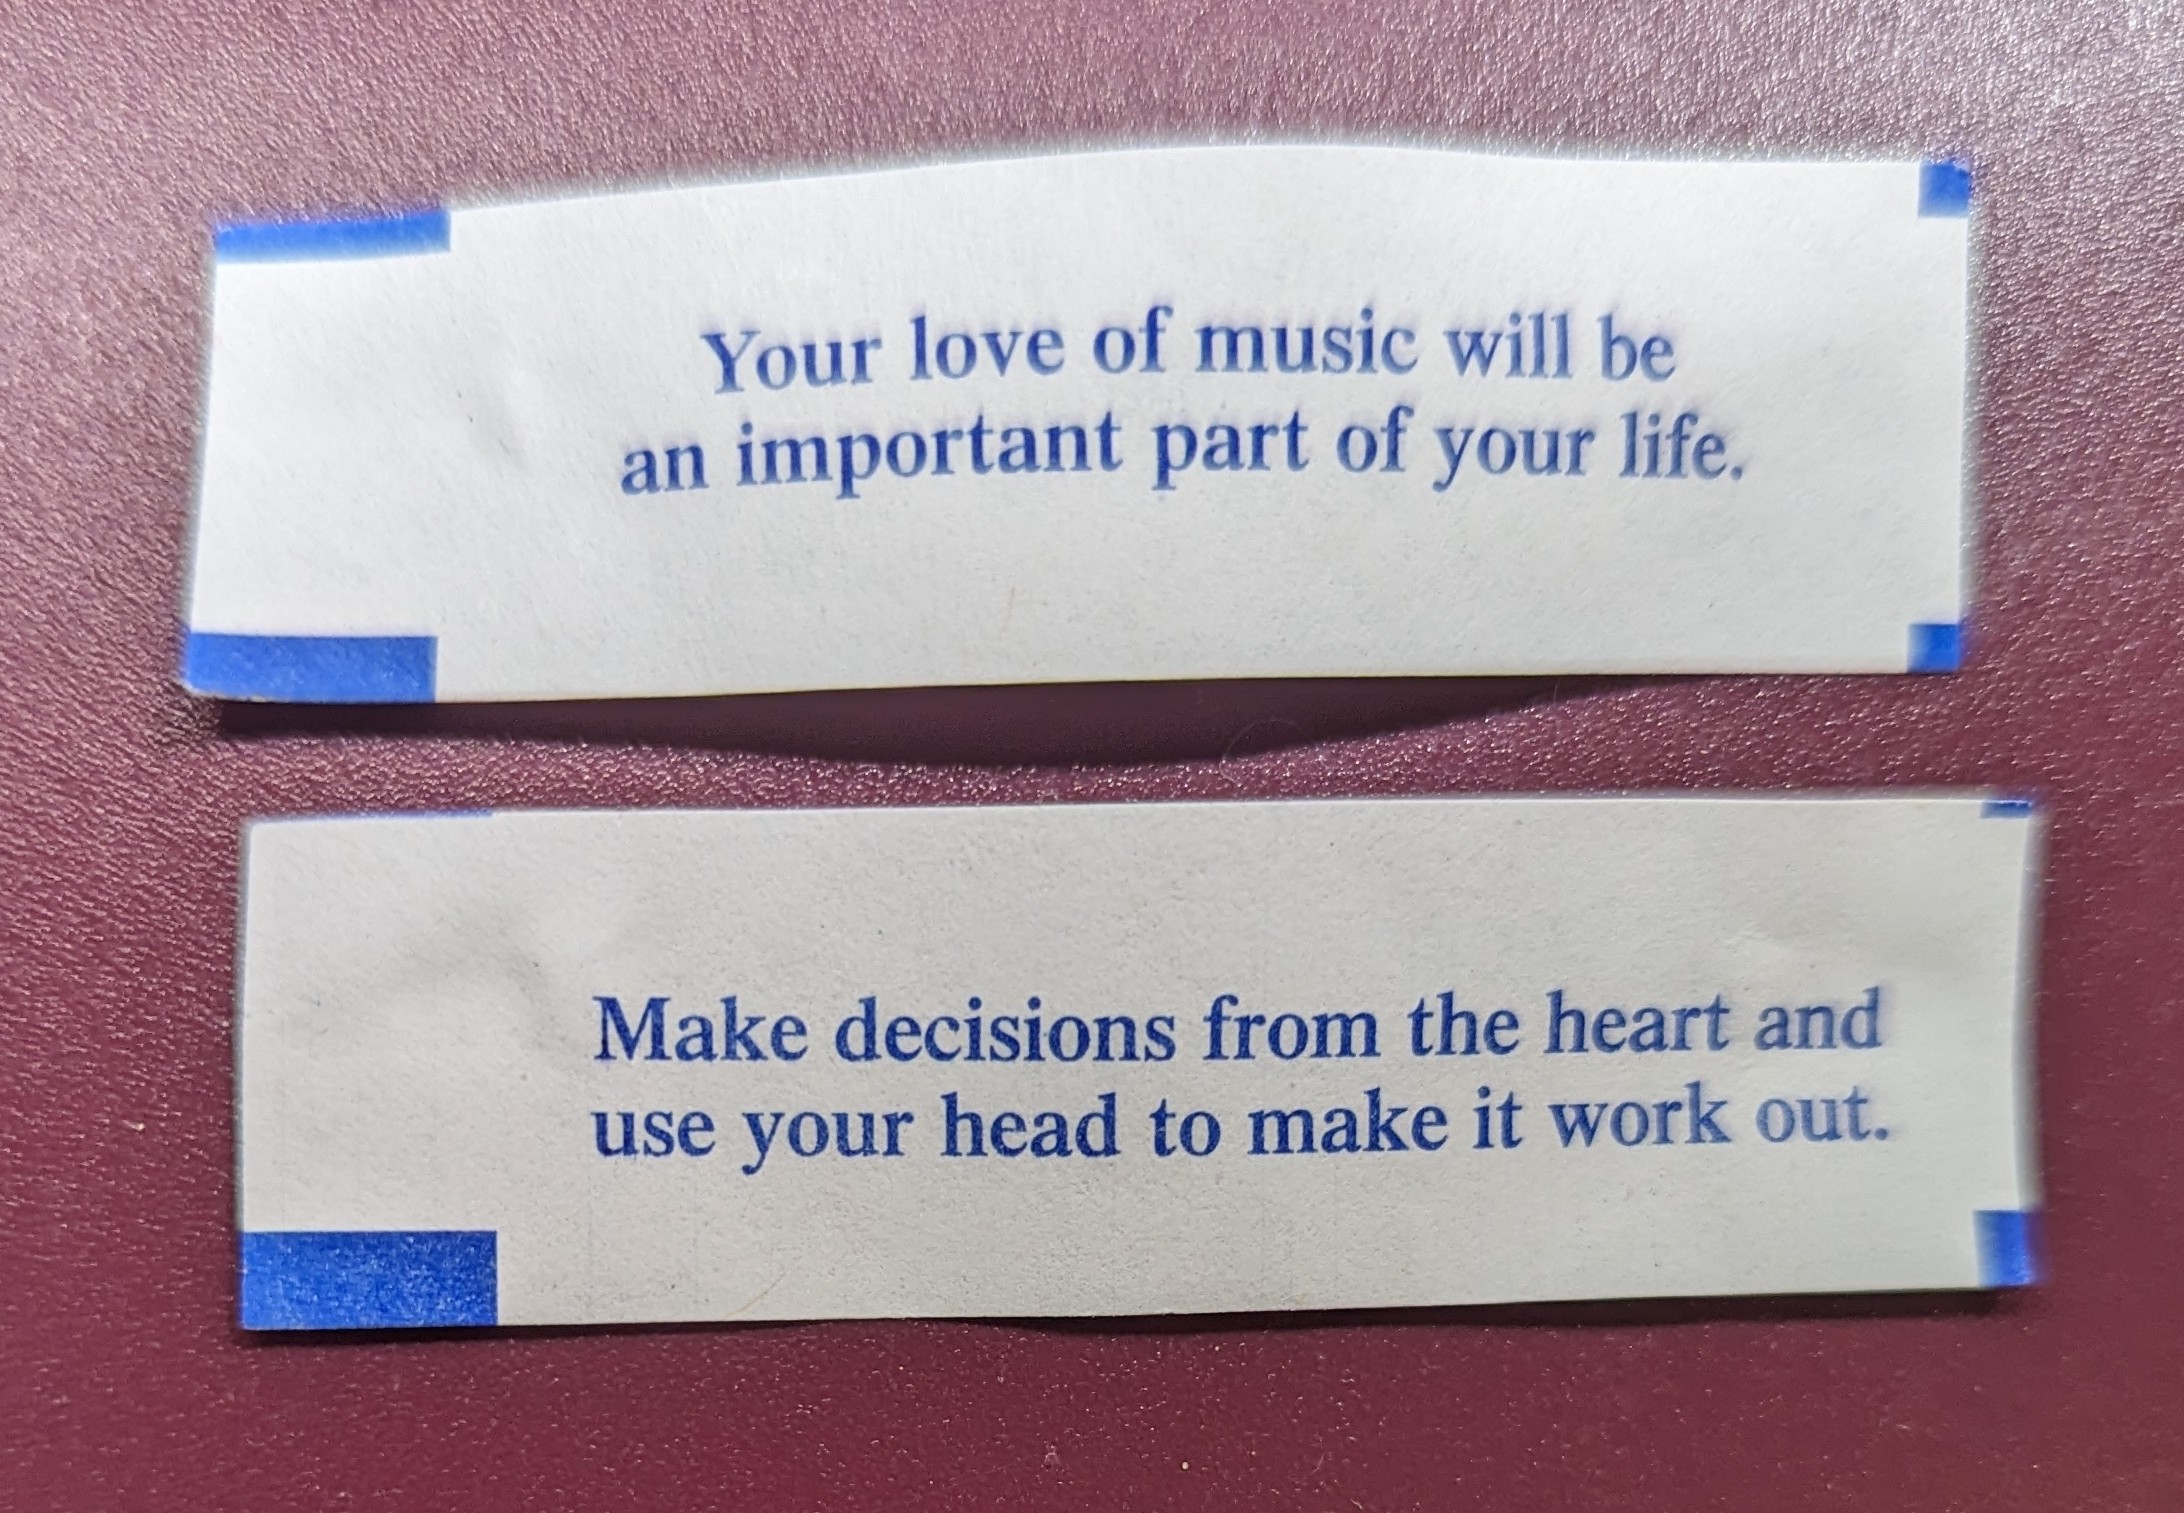 Only one of these is a fortune